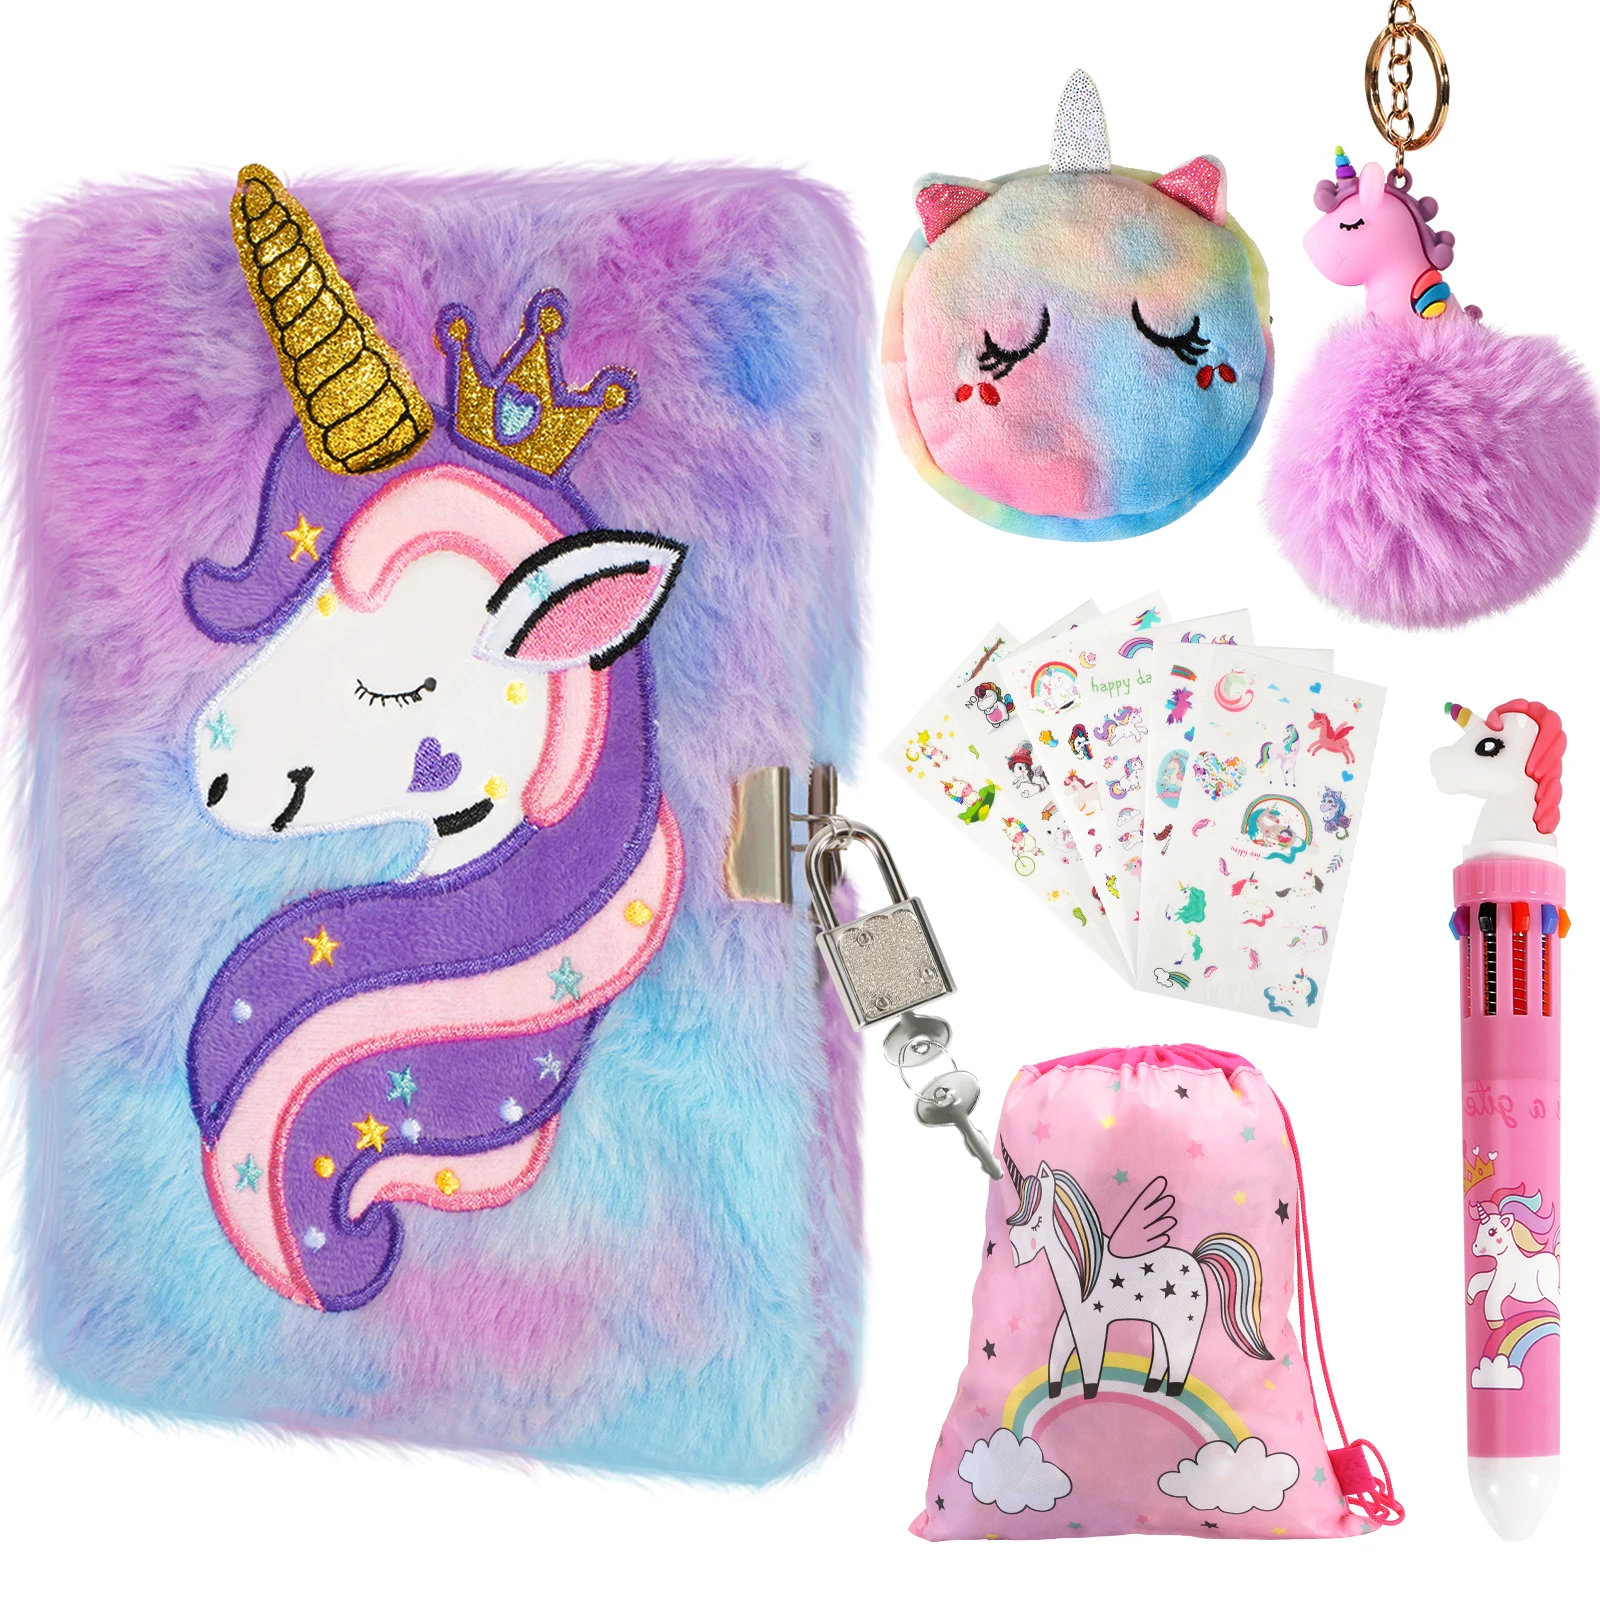 Plush Unicorn Diary With Lock For Kids Cute Padlock Secret Notebook Student School A5 Size Stationery Memo Pads For Girls Gift 10pcs set printed unicorn mermaid donuts hair bow with clip for girls cute hair clip headwear barrettes baby hair accessories